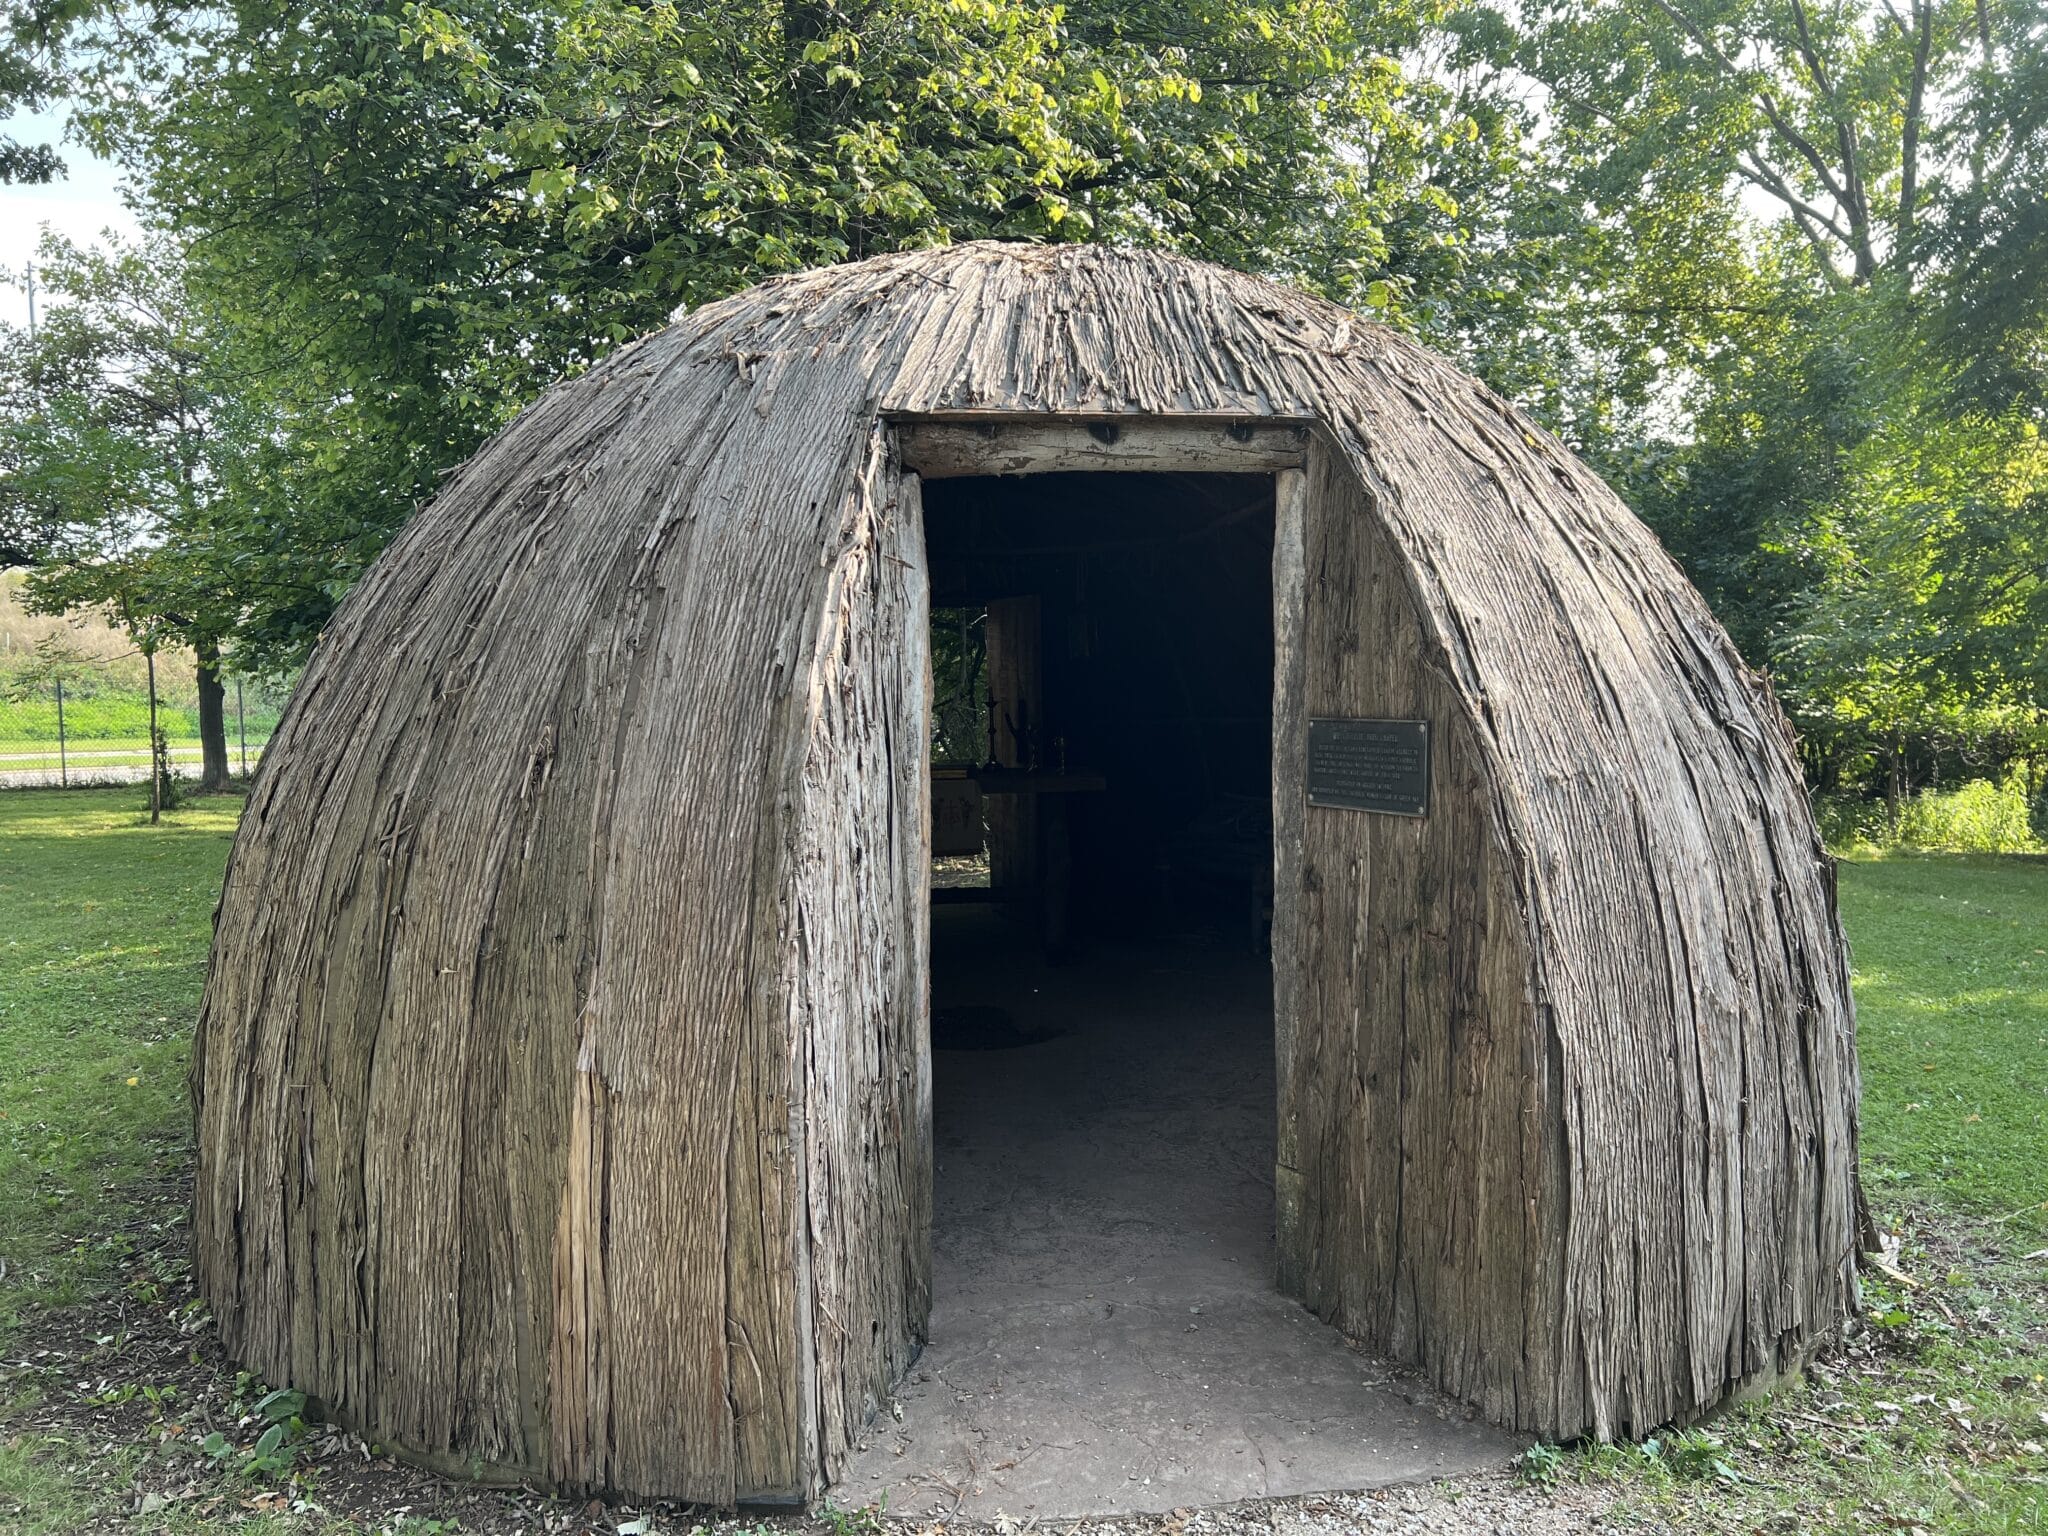 A small, thatched hut features a rounded top and a square door. It shows an early-Wisconsin bark chapel—a replica of Wisconsin’s first Catholic church.